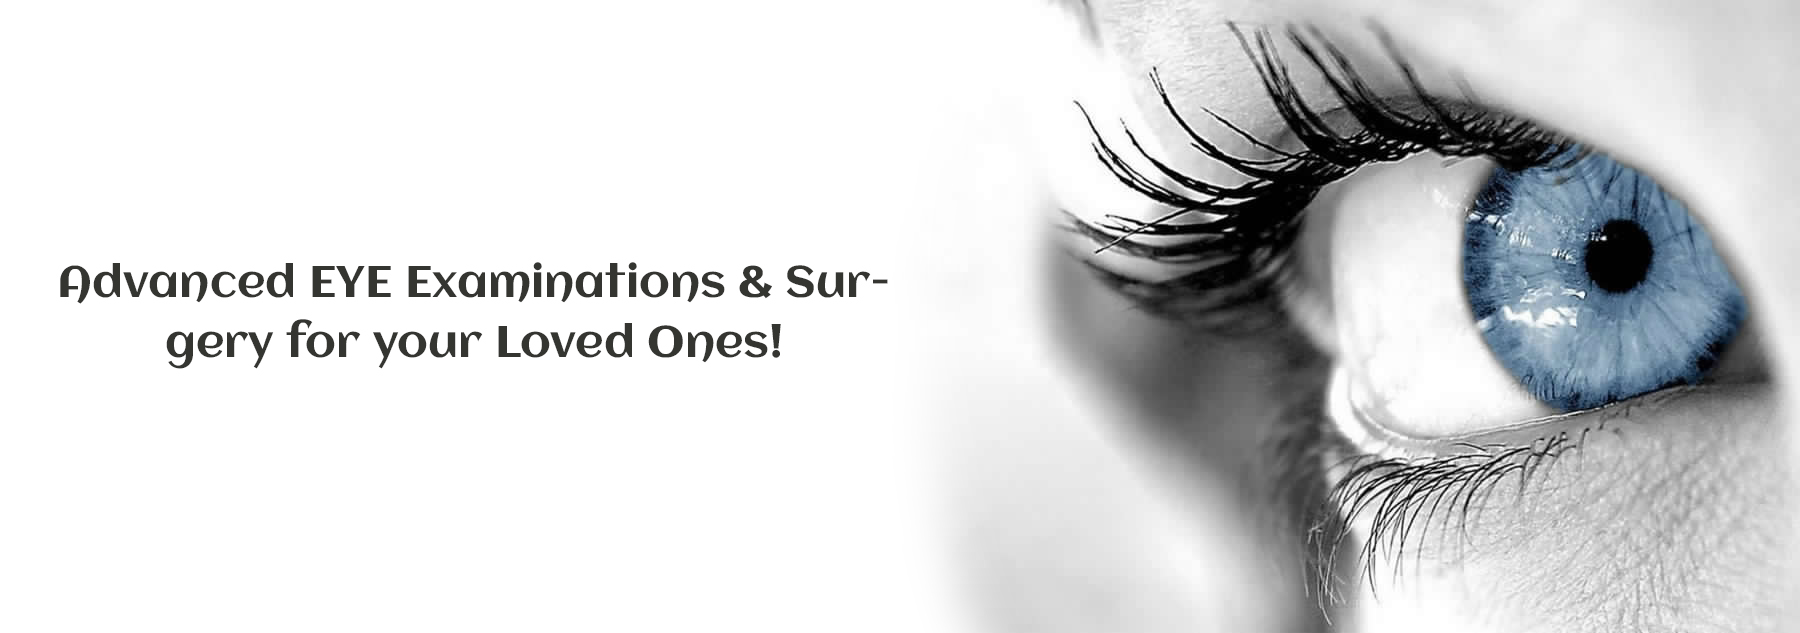 Advanced EYE Examinations & Surgery for your Loved Ones!